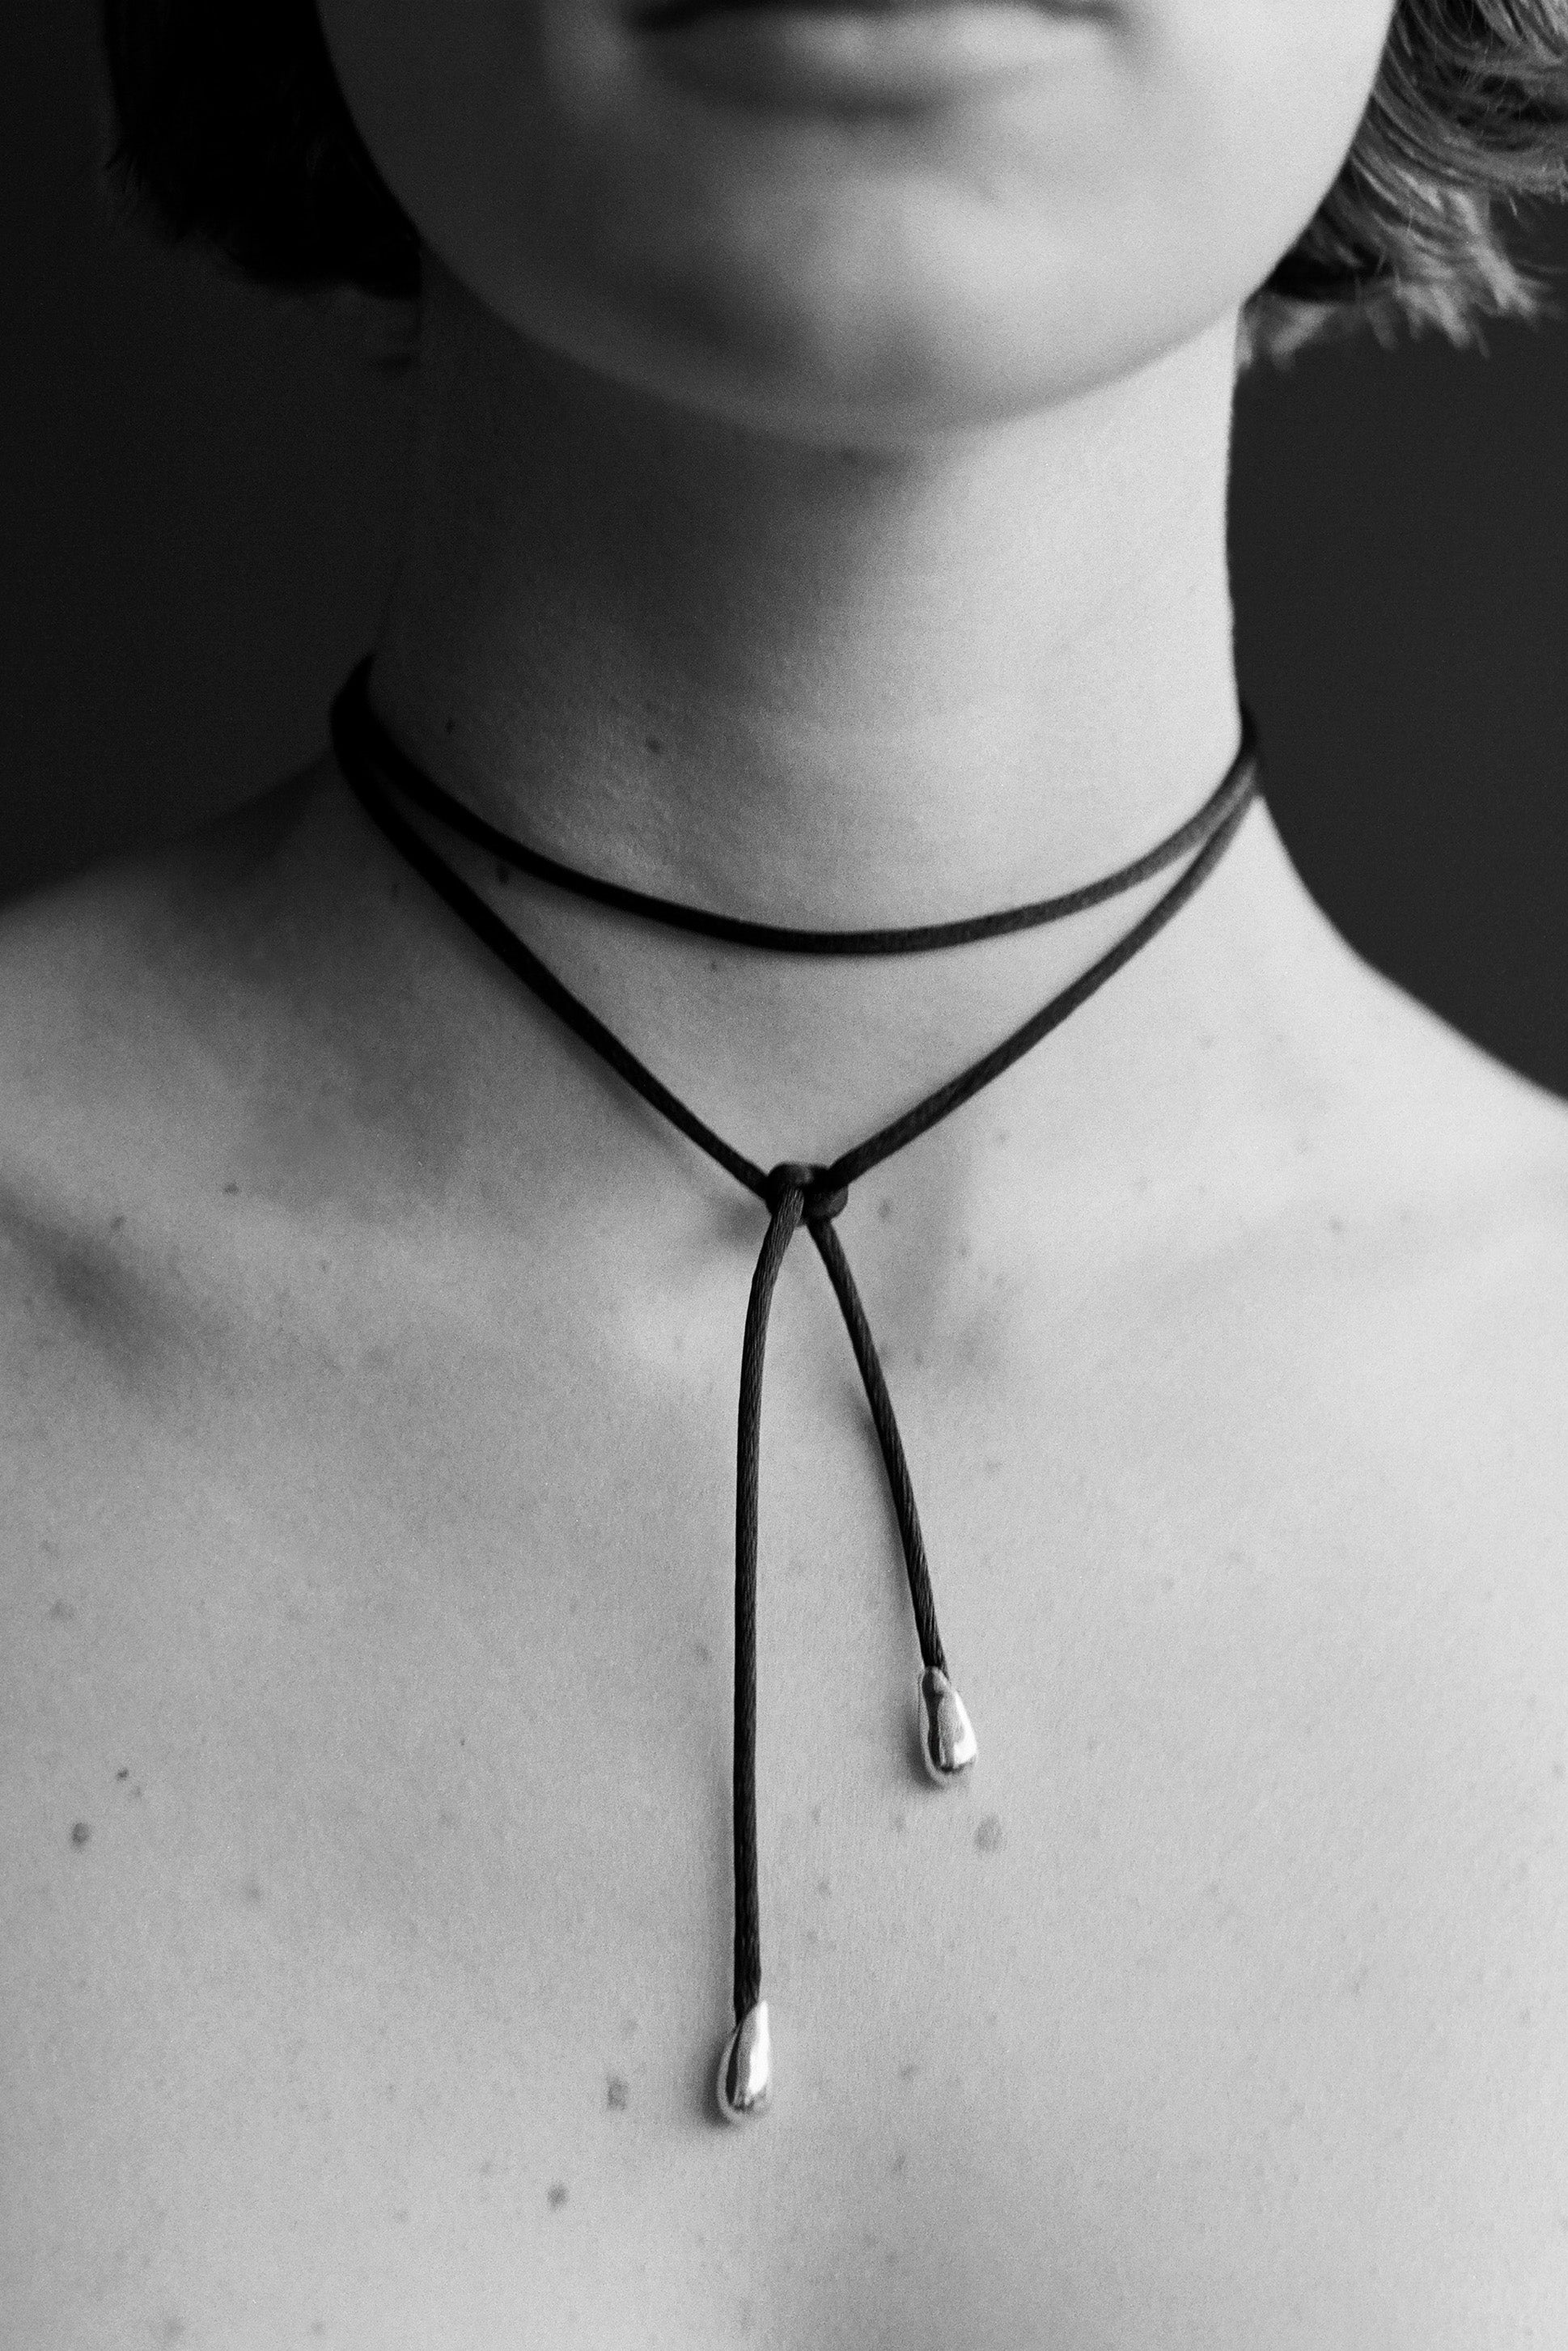 Men's 20 Braided Black Leather Choker Necklace